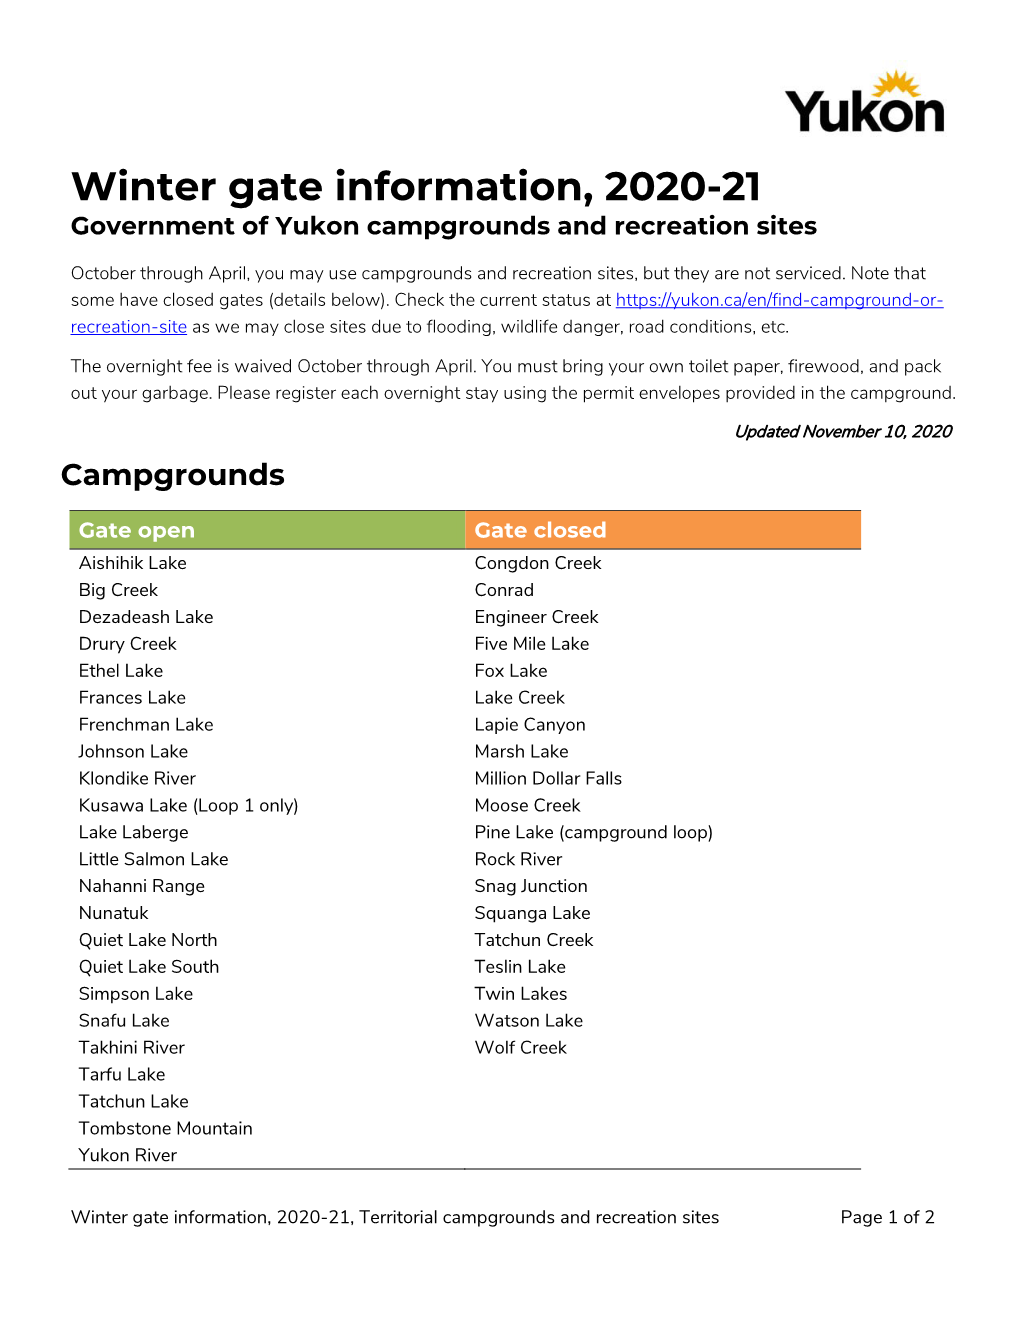 Winter Gate Information, 2020-21 Government of Yukon Campgrounds and Recreation Sites